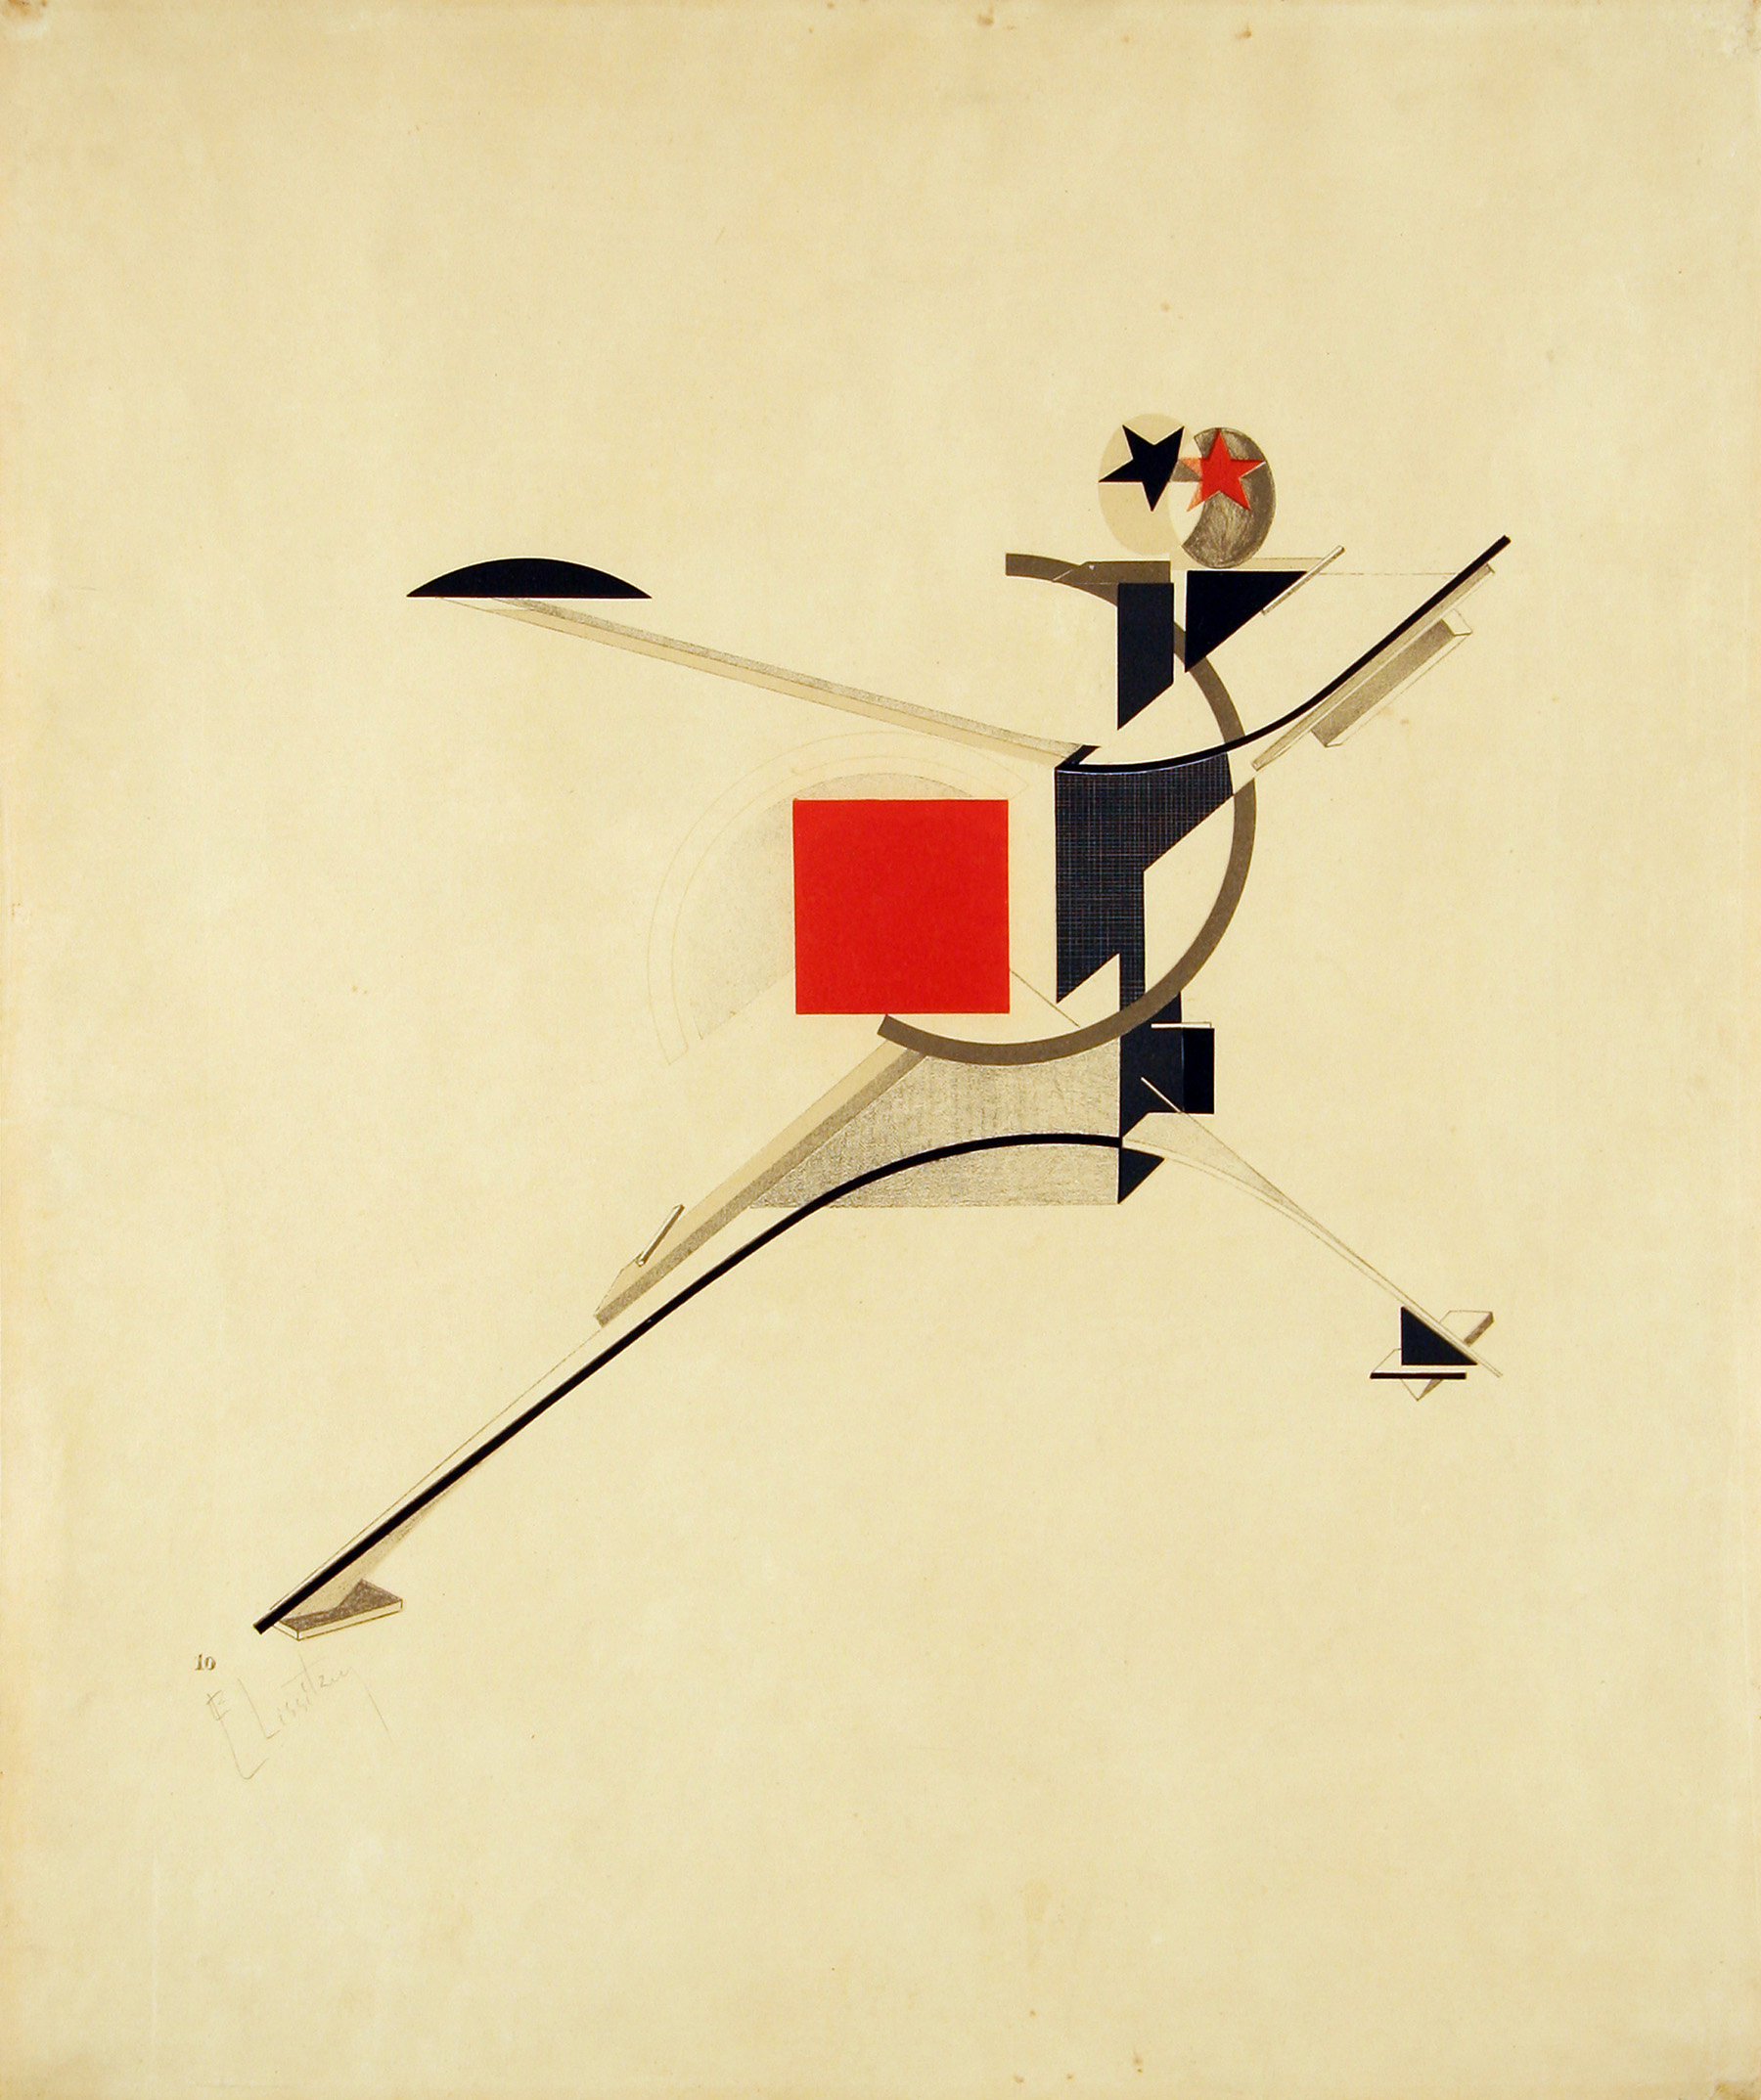 Uomo nuovo by El Lissitzky - 1923 - 30.8 x 32.1 cm Museum of Modern Art